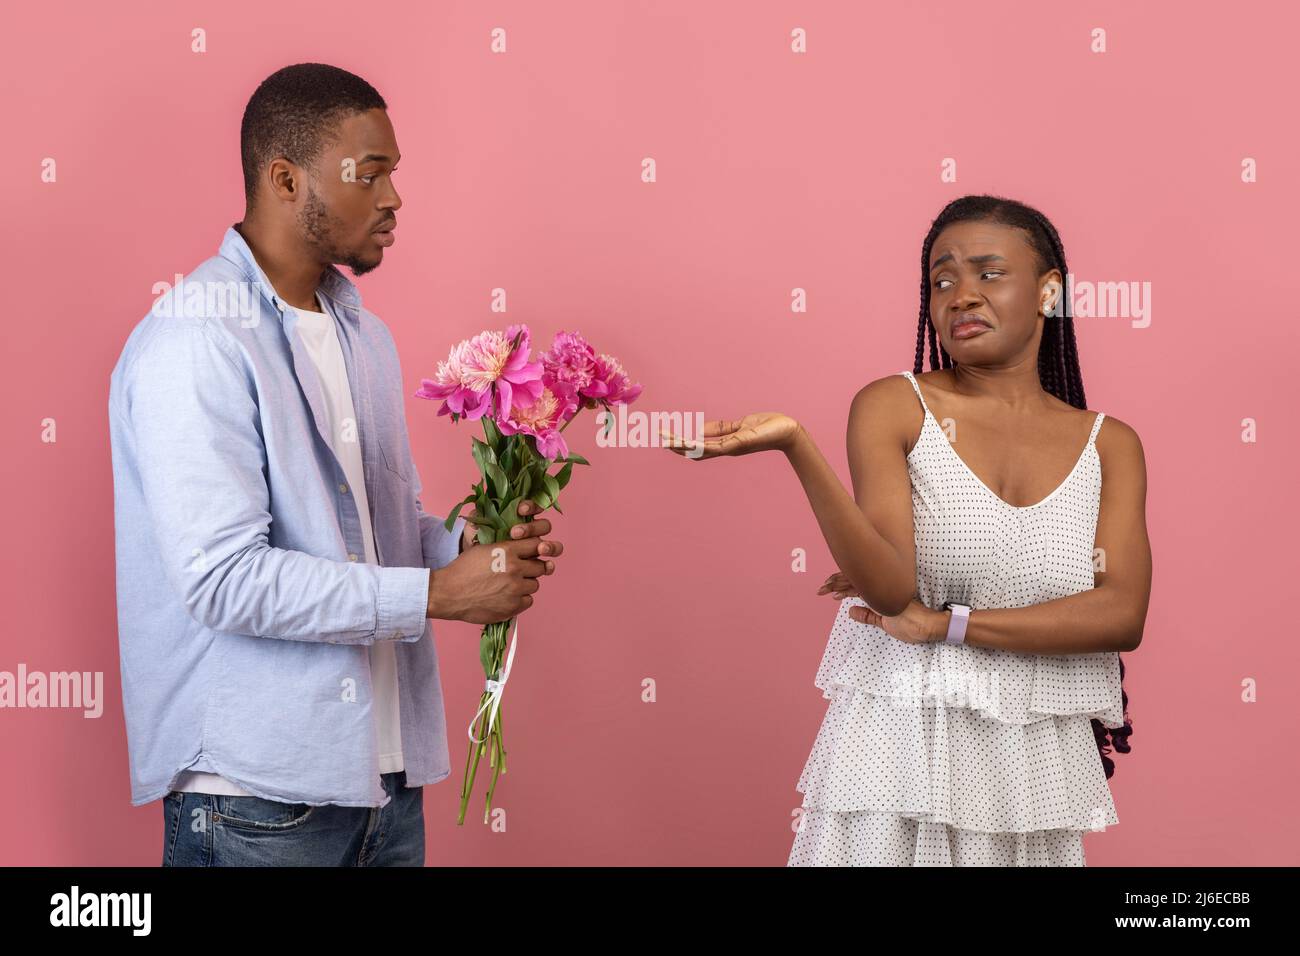 Black man making surprise for bored woman giving flowers Stock Photo